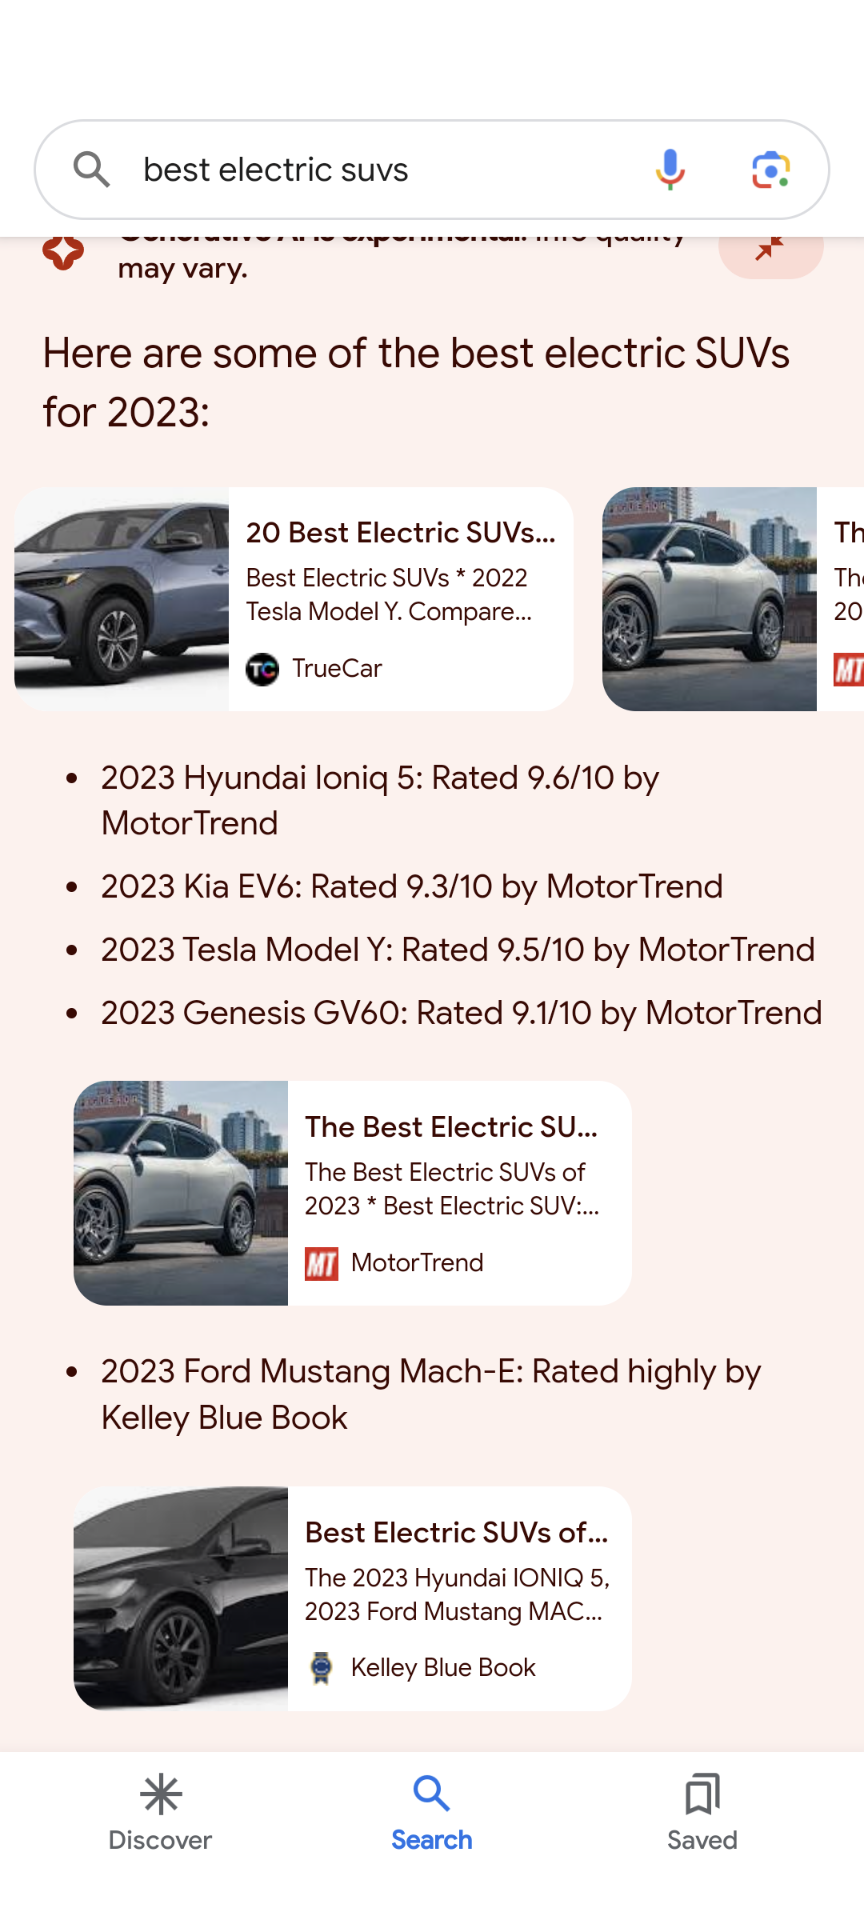 the ‘best electric suvs’ Google search query in mobile shows a generative AI response where after a few vehicles are mentioned links to resources are shown below and then another set of listed vehicles followed by more links to those resources